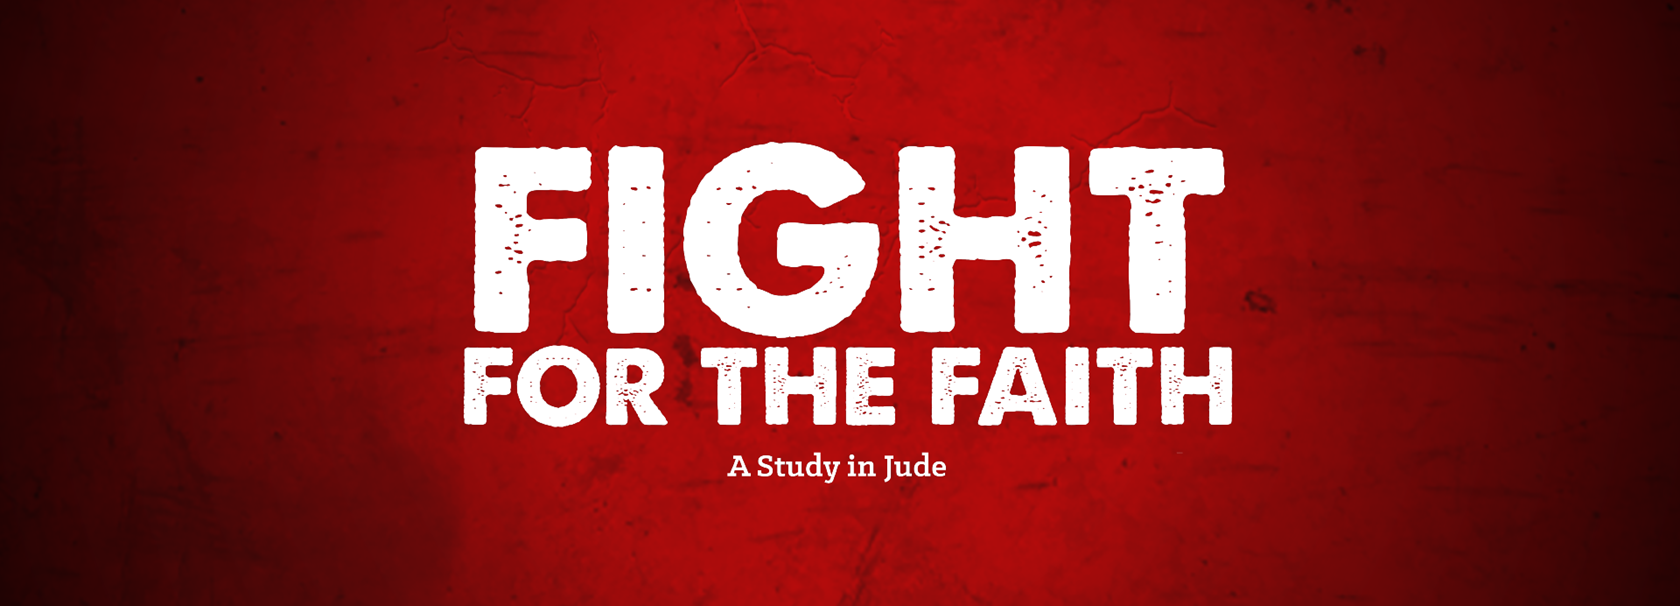 Series graphic for Fight For the Faith (Jude)